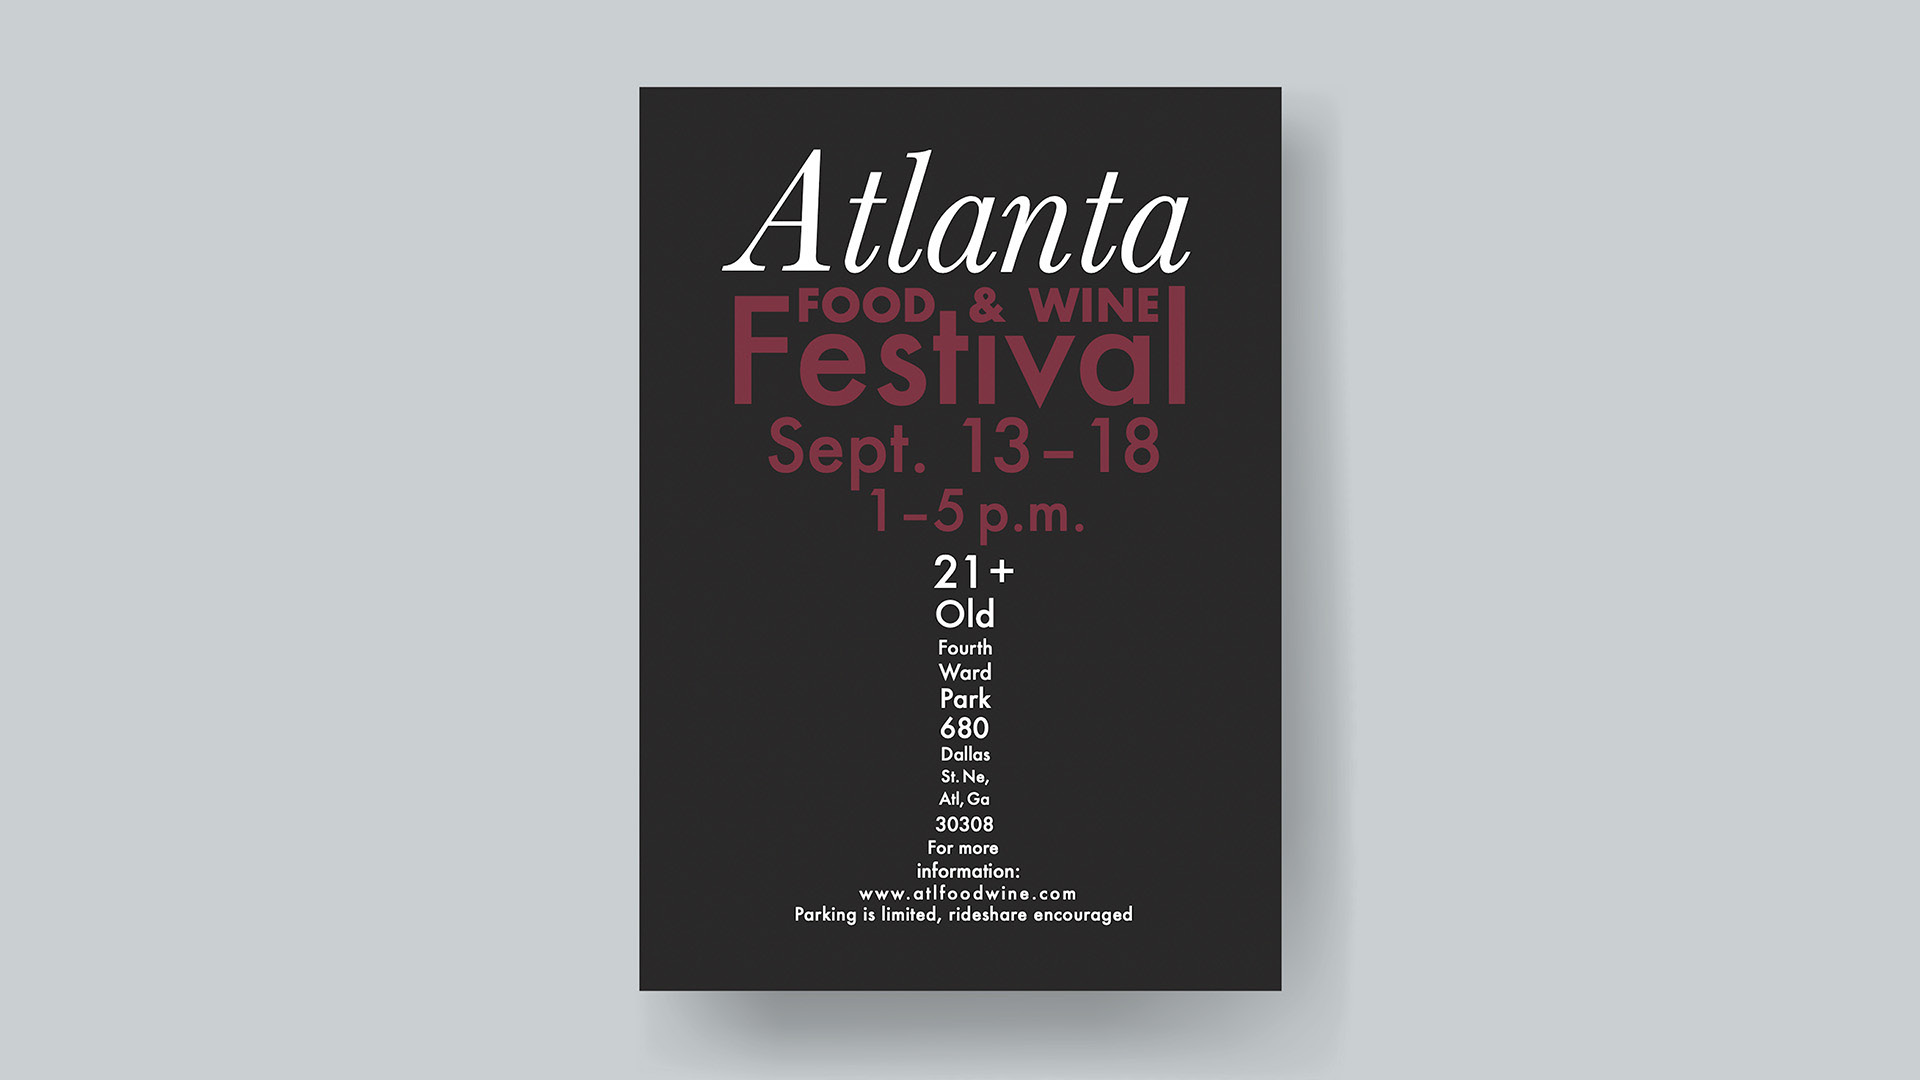 Food and Wine Festival, Marketing Flyer / Food and Wine Festival, Marketing Flyer, 5.5x8.5 inches print flyer, 2022.  This was created to market the Atlanta Food and Wine Festival.